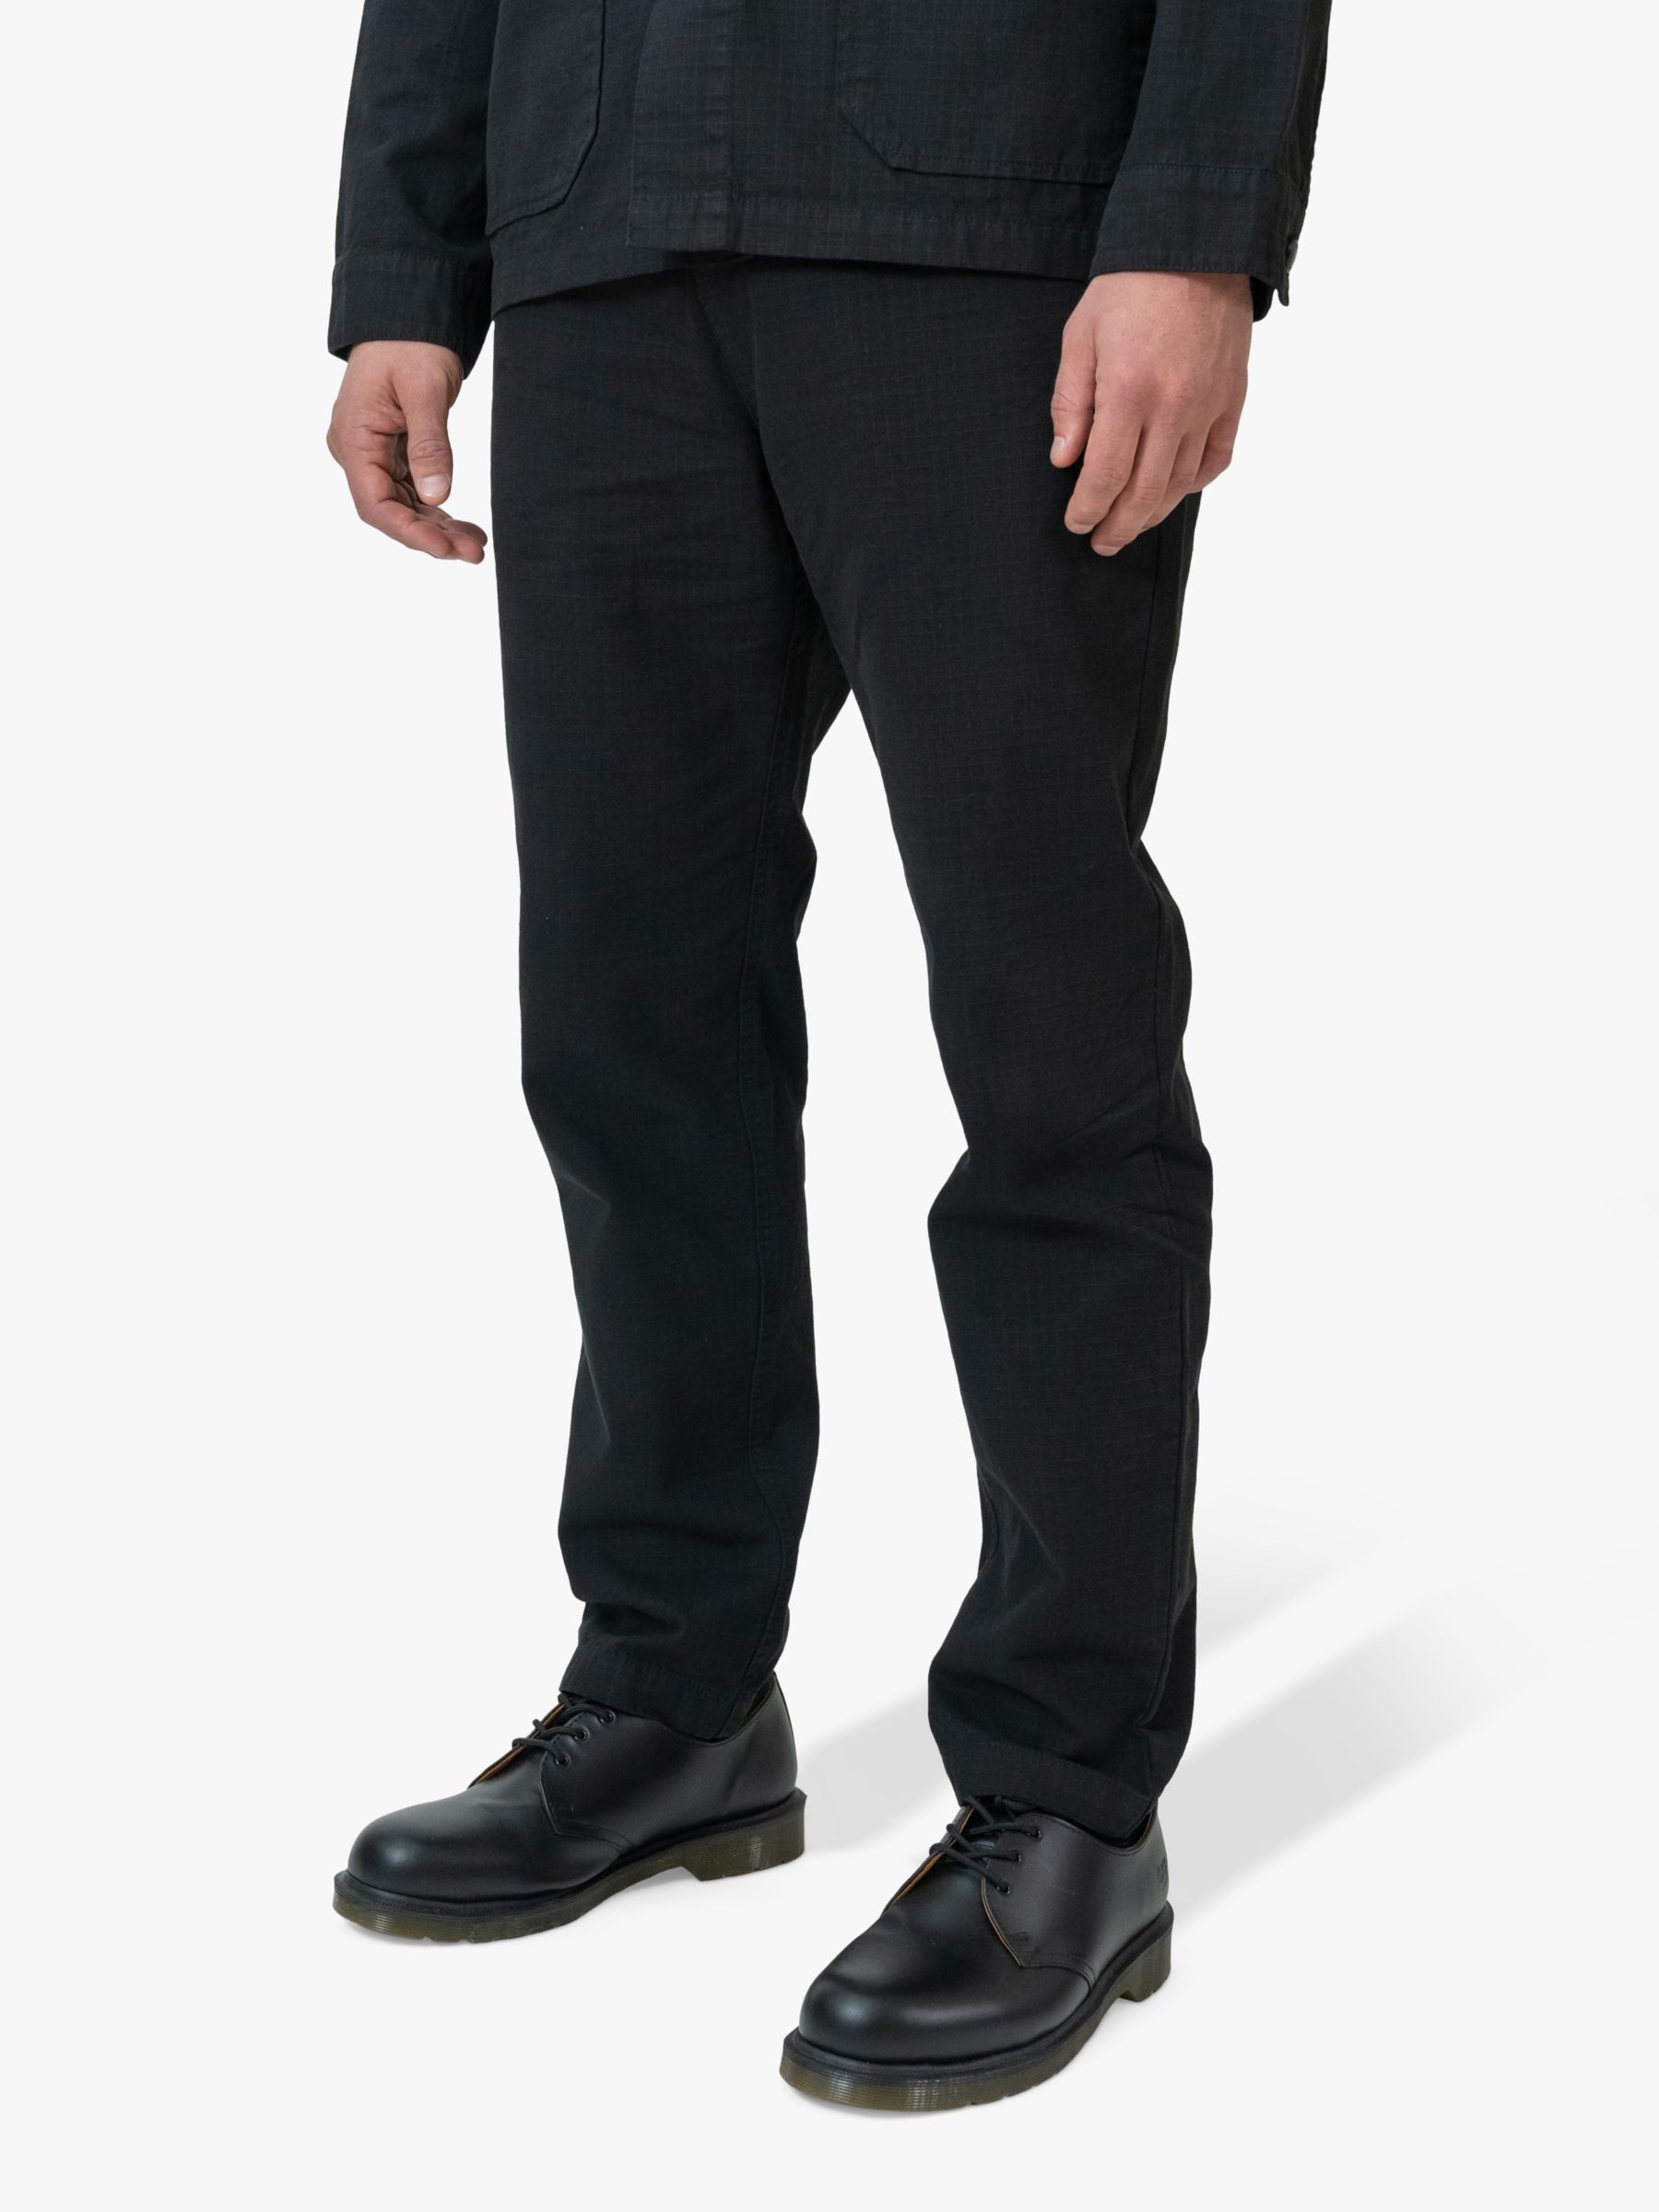 M.C.Overalls Relaxed Fit Ripstop Trousers, Black, W28/L32